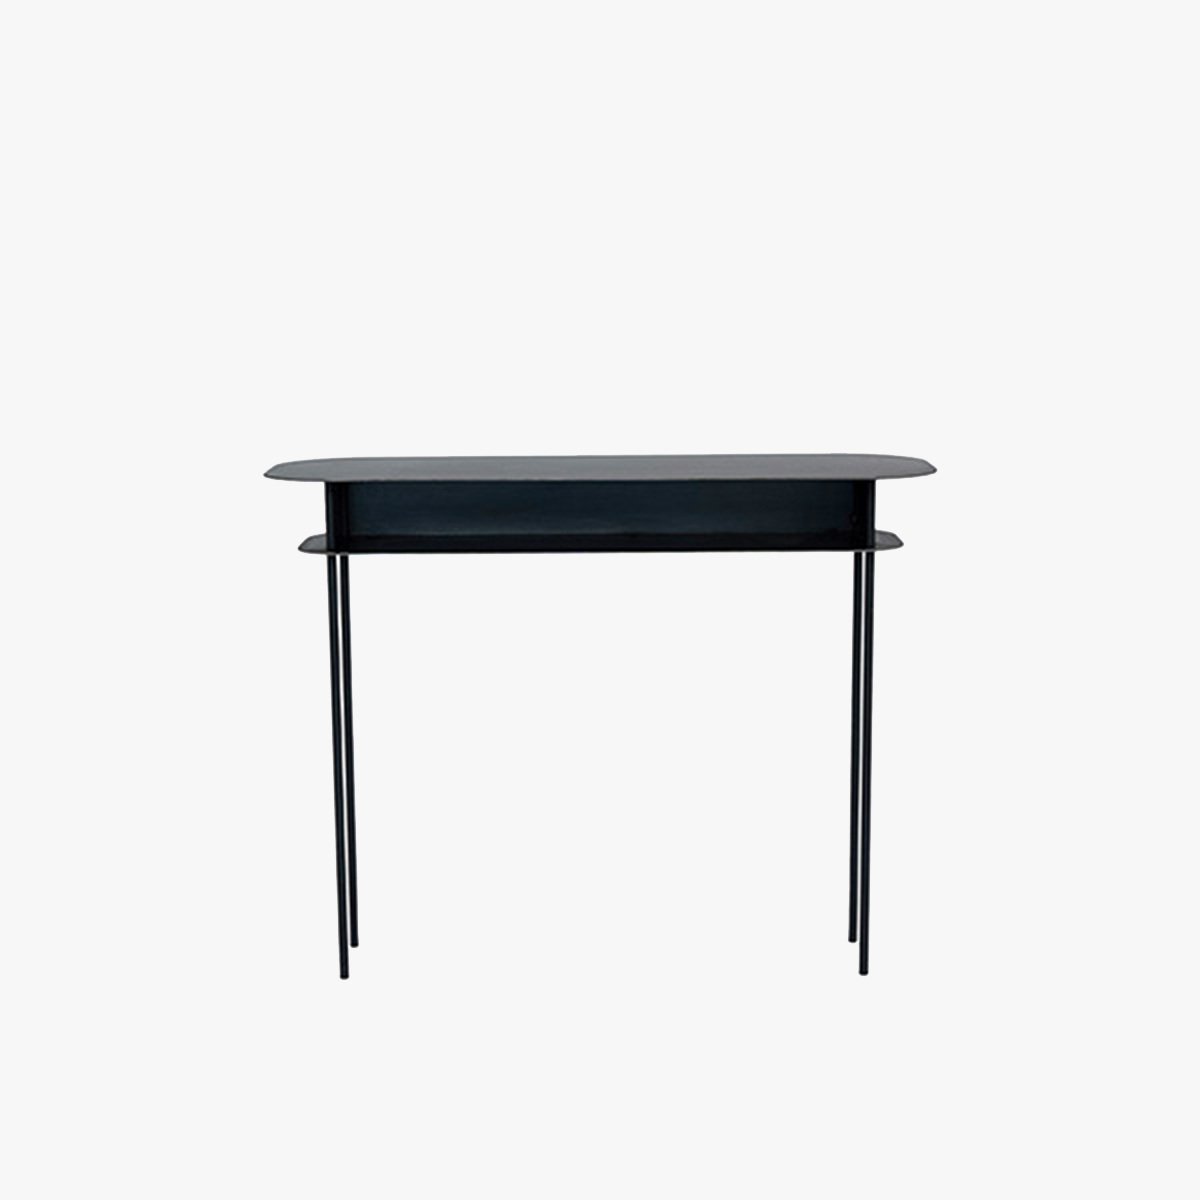 Console Table Tokyo, Black - Different sizes - Waxed steel - image 1